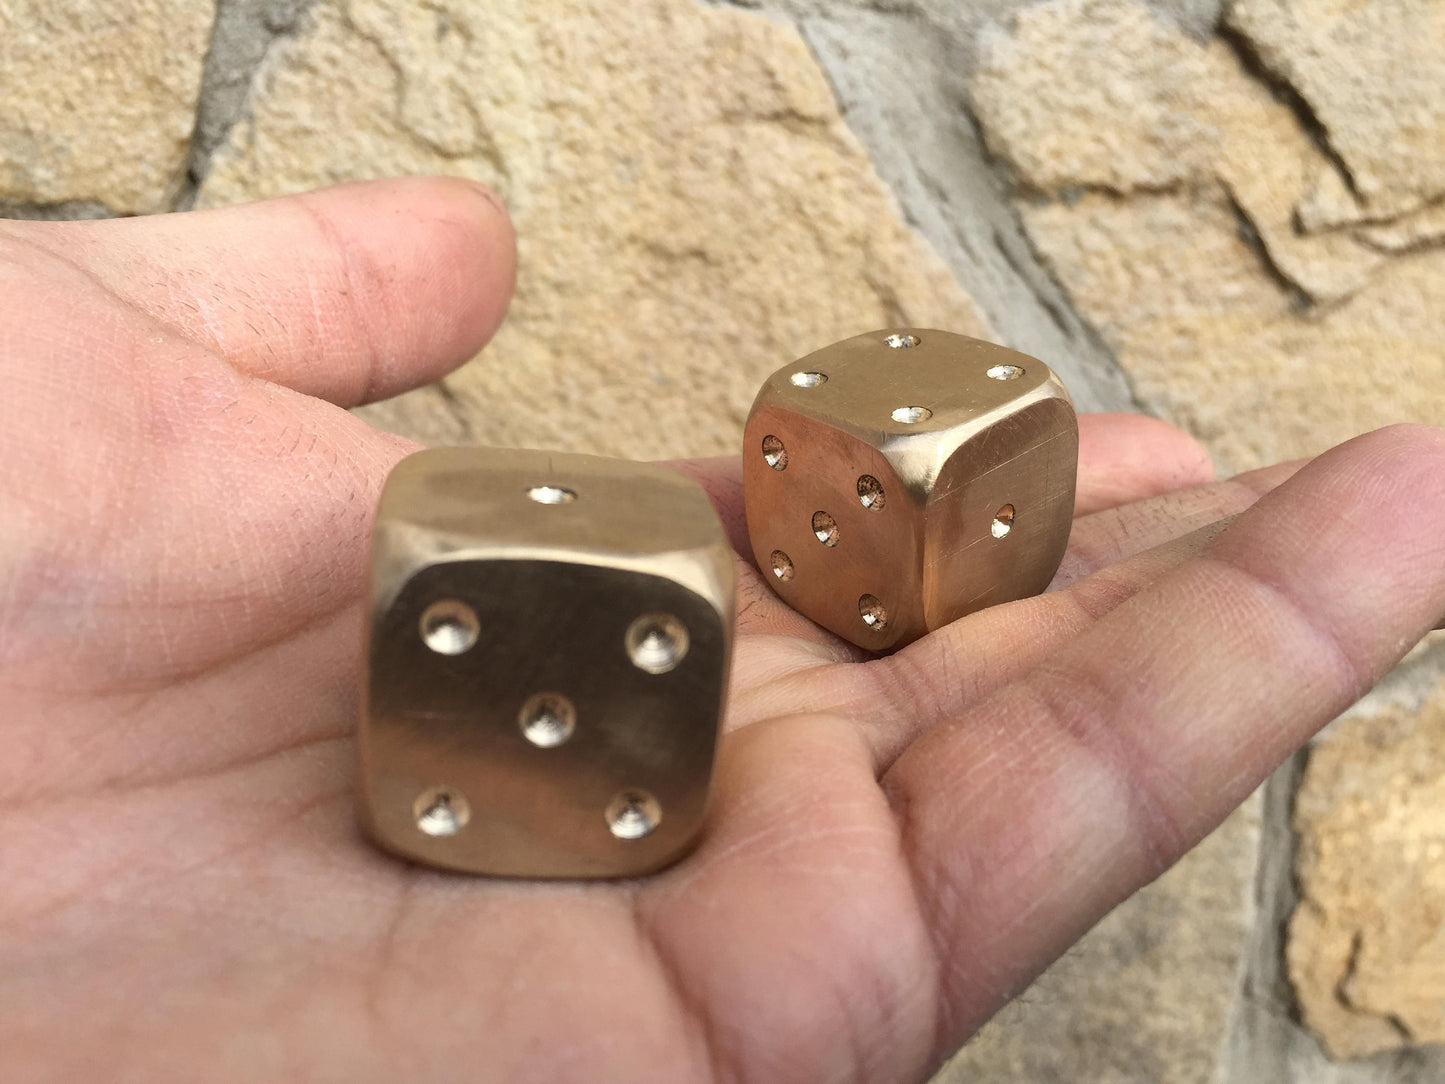 Bronze gift, bronze dices, bronze anniversary gift, hand crafted dices, 8 year gift, tabletop game, board game, bridesmaid gift, dice set